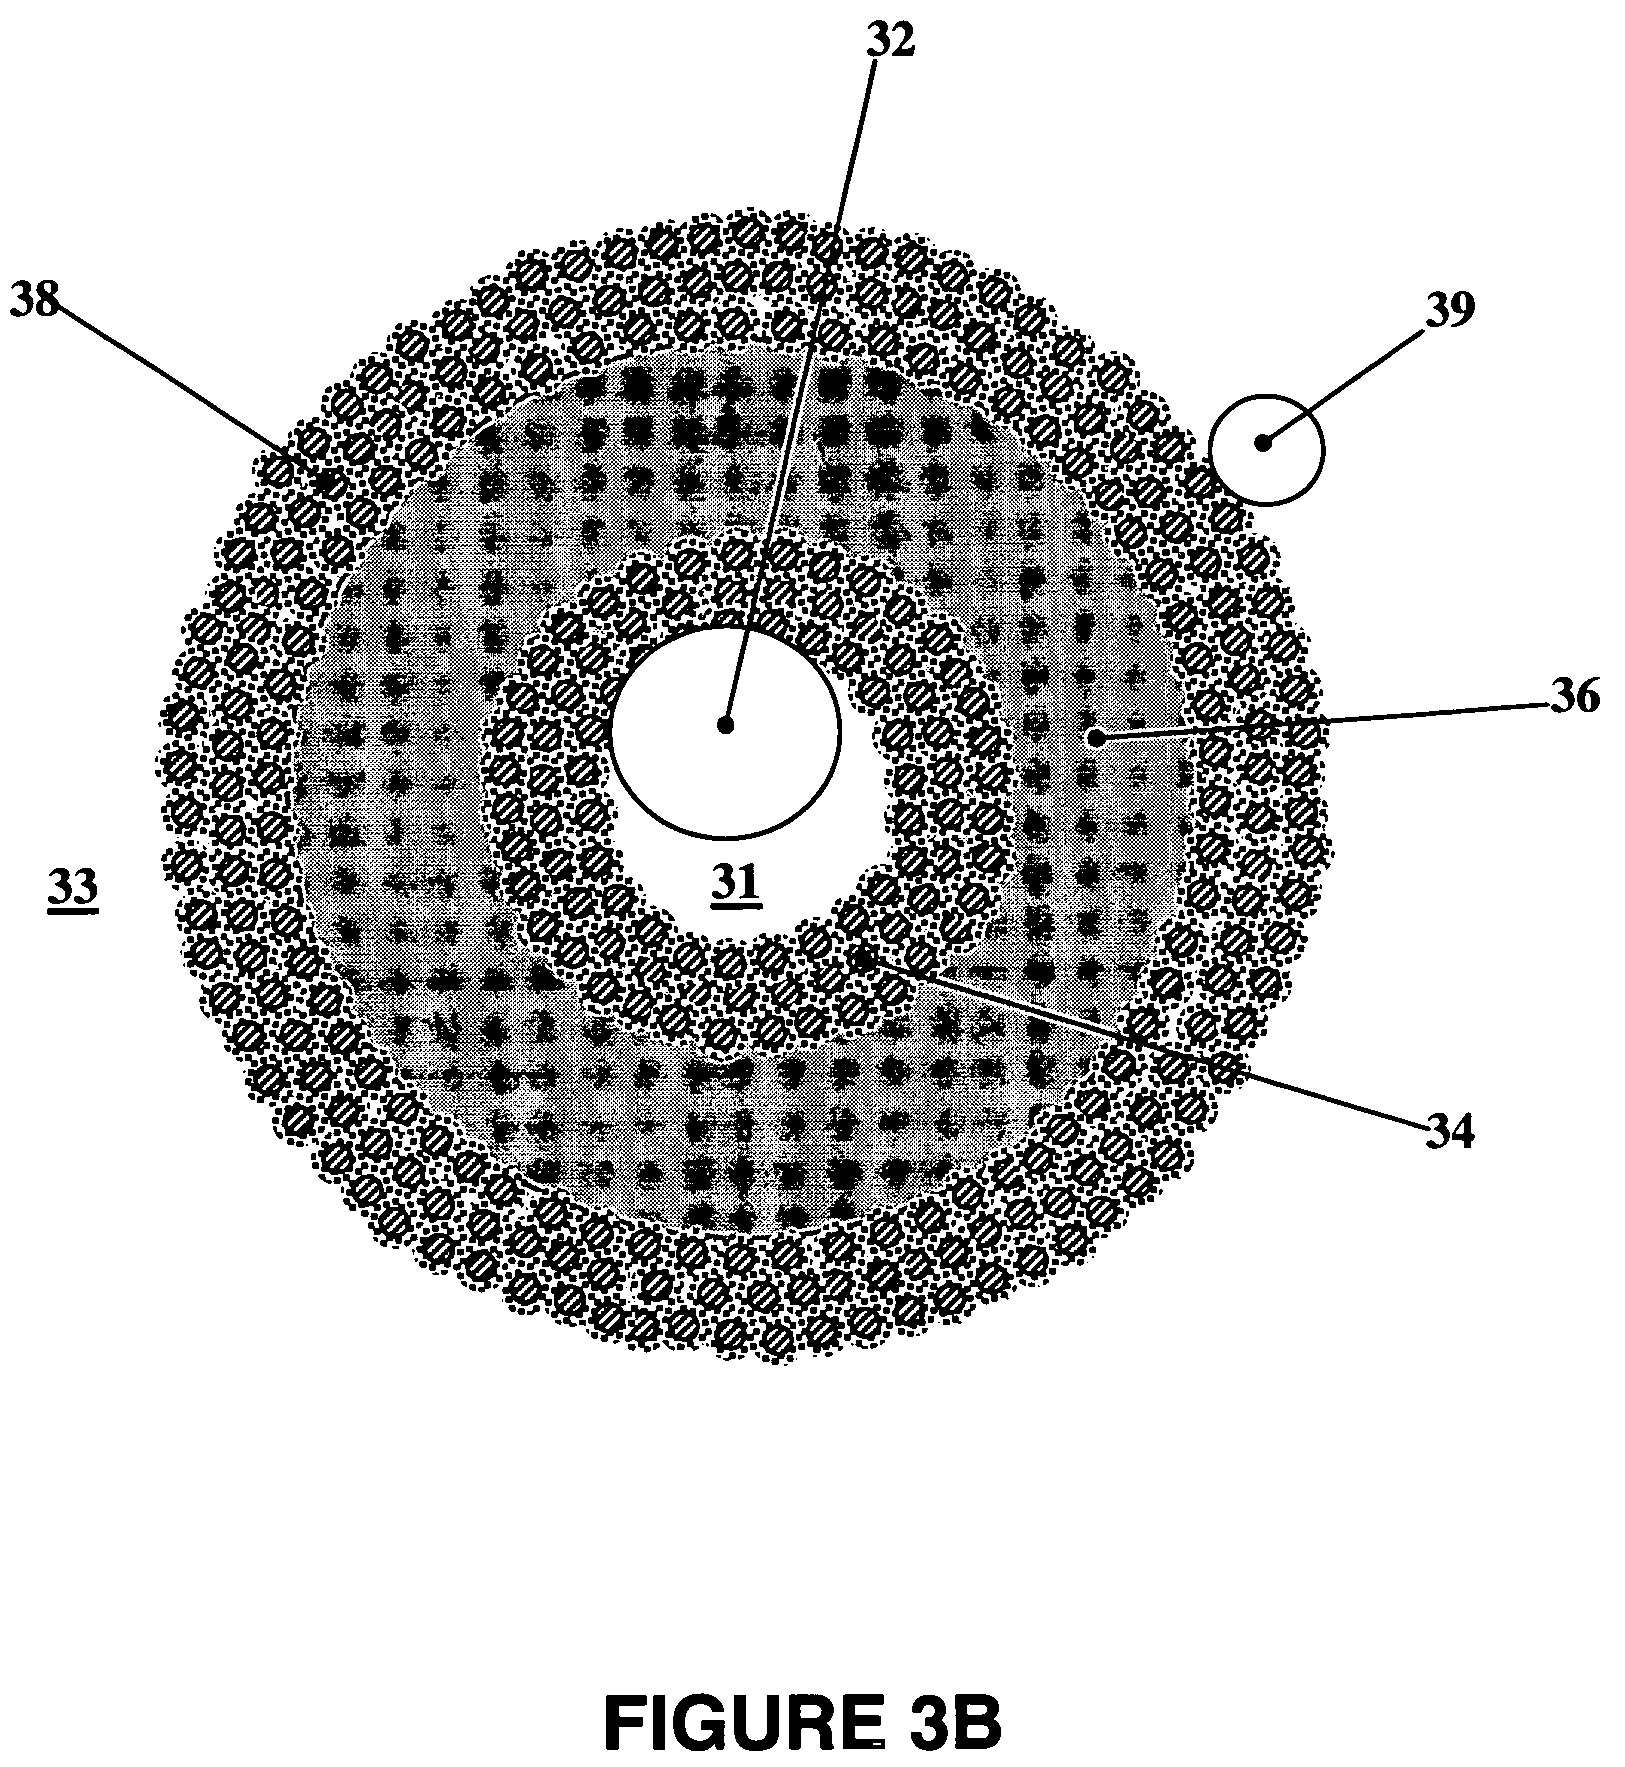 Microfibrous fuel cell assemblies comprising fiber-supported electrocatalyst layers, and methods of making same